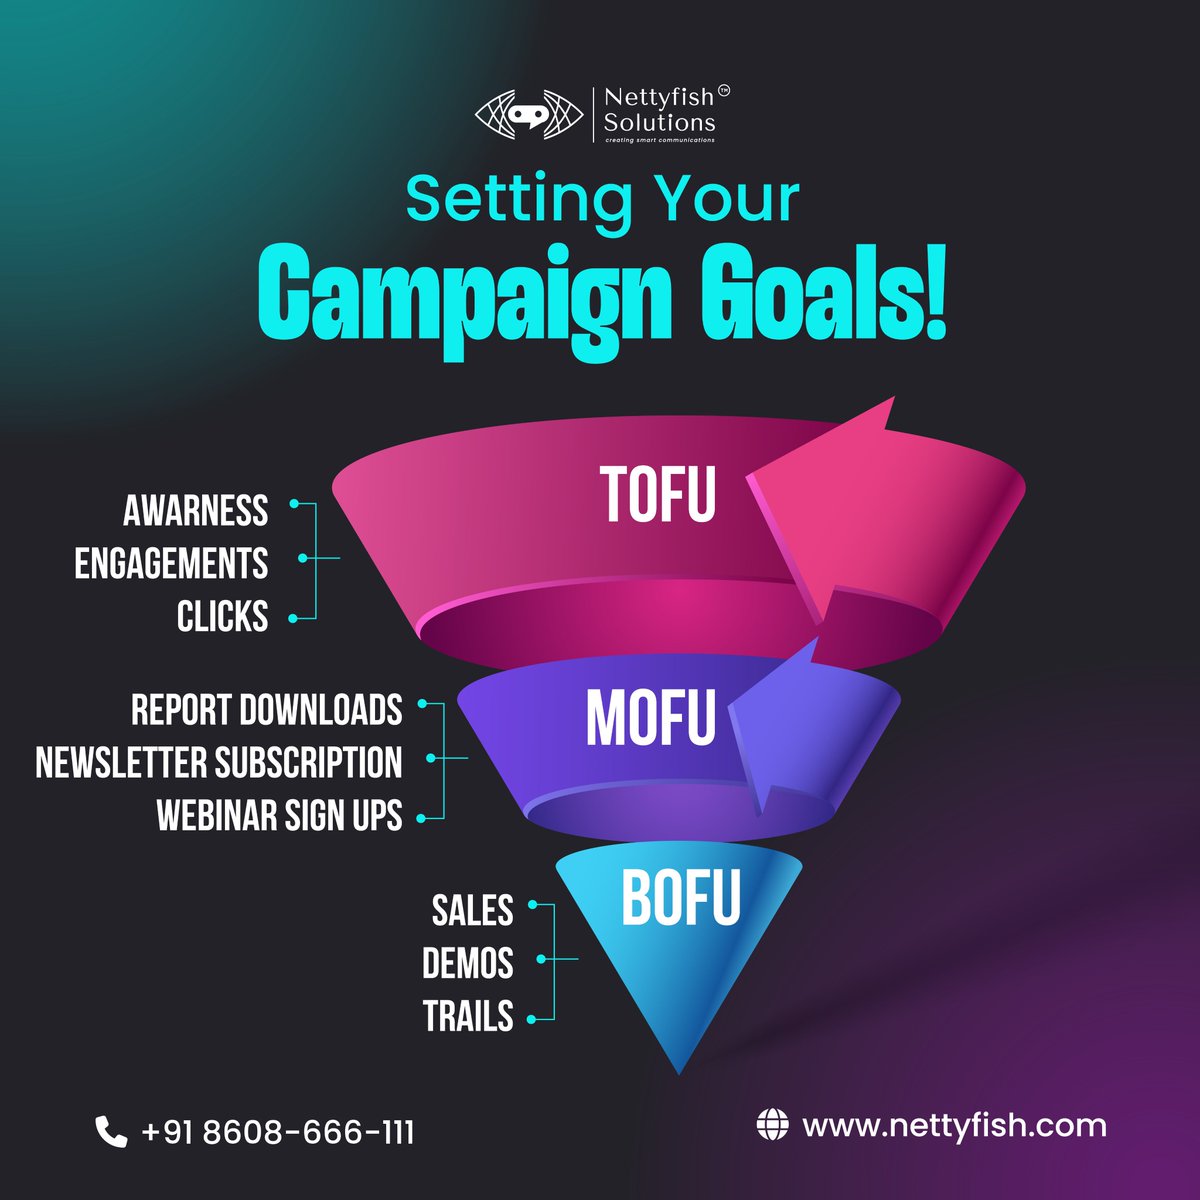 🚀Define your campaign goals like a pro! From creating awareness to driving sales, let Nettyfish guide you through every stage. #CampaignGoals #MarketingStrategy #Nettyfish #SocialMedia #marketing #marketingtips #success #DigitalMarketing #BusinessTips #Branding #BoostSales